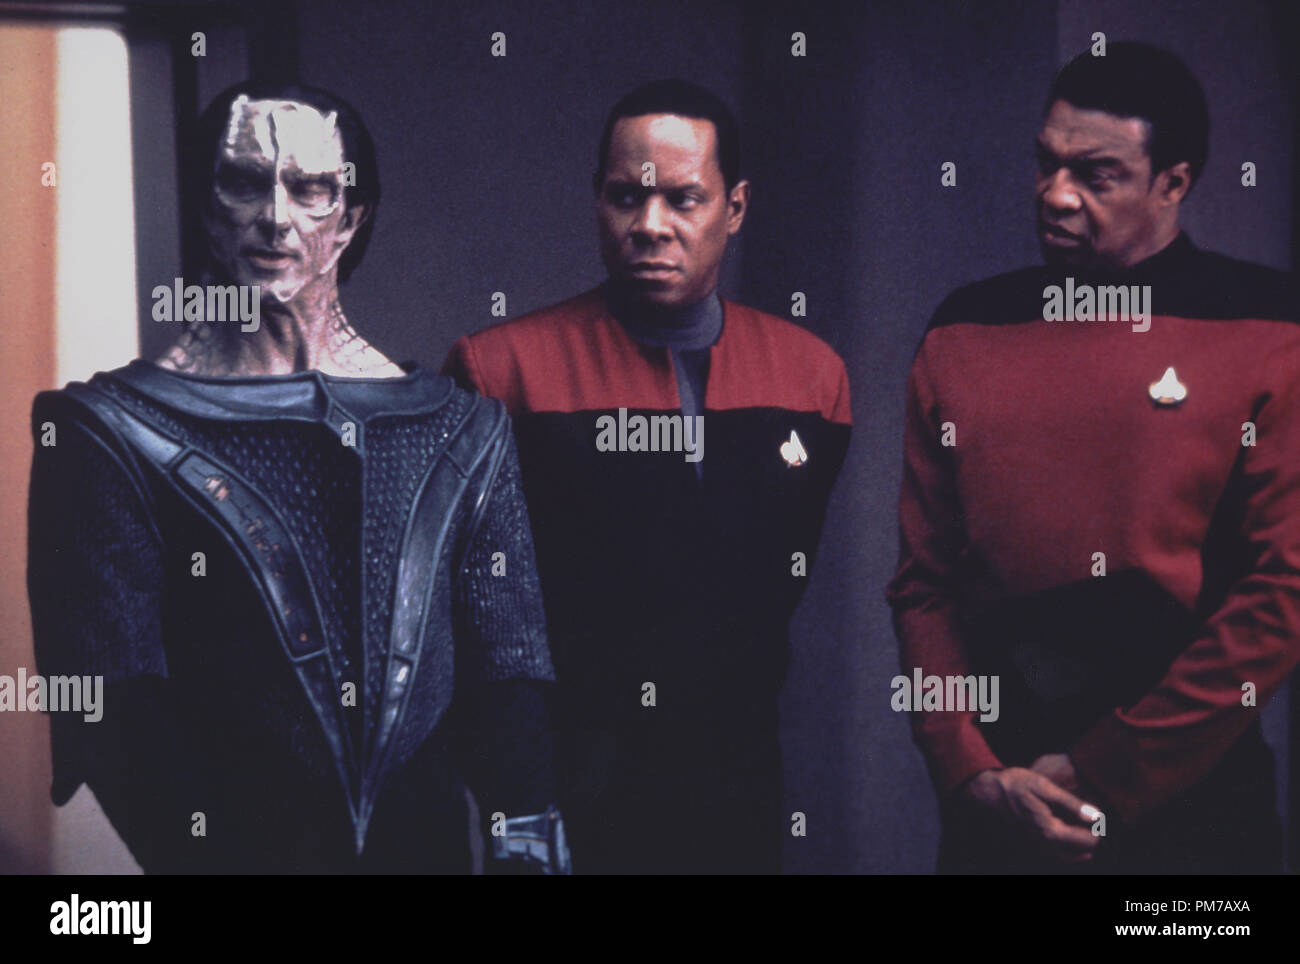 Film Still from 'Star Trek: Deep Space Nine' Marc Alaimo, Avery Brooks 1995   File Reference # 31043084THA  For Editorial Use Only - All Rights Reserved Stock Photo